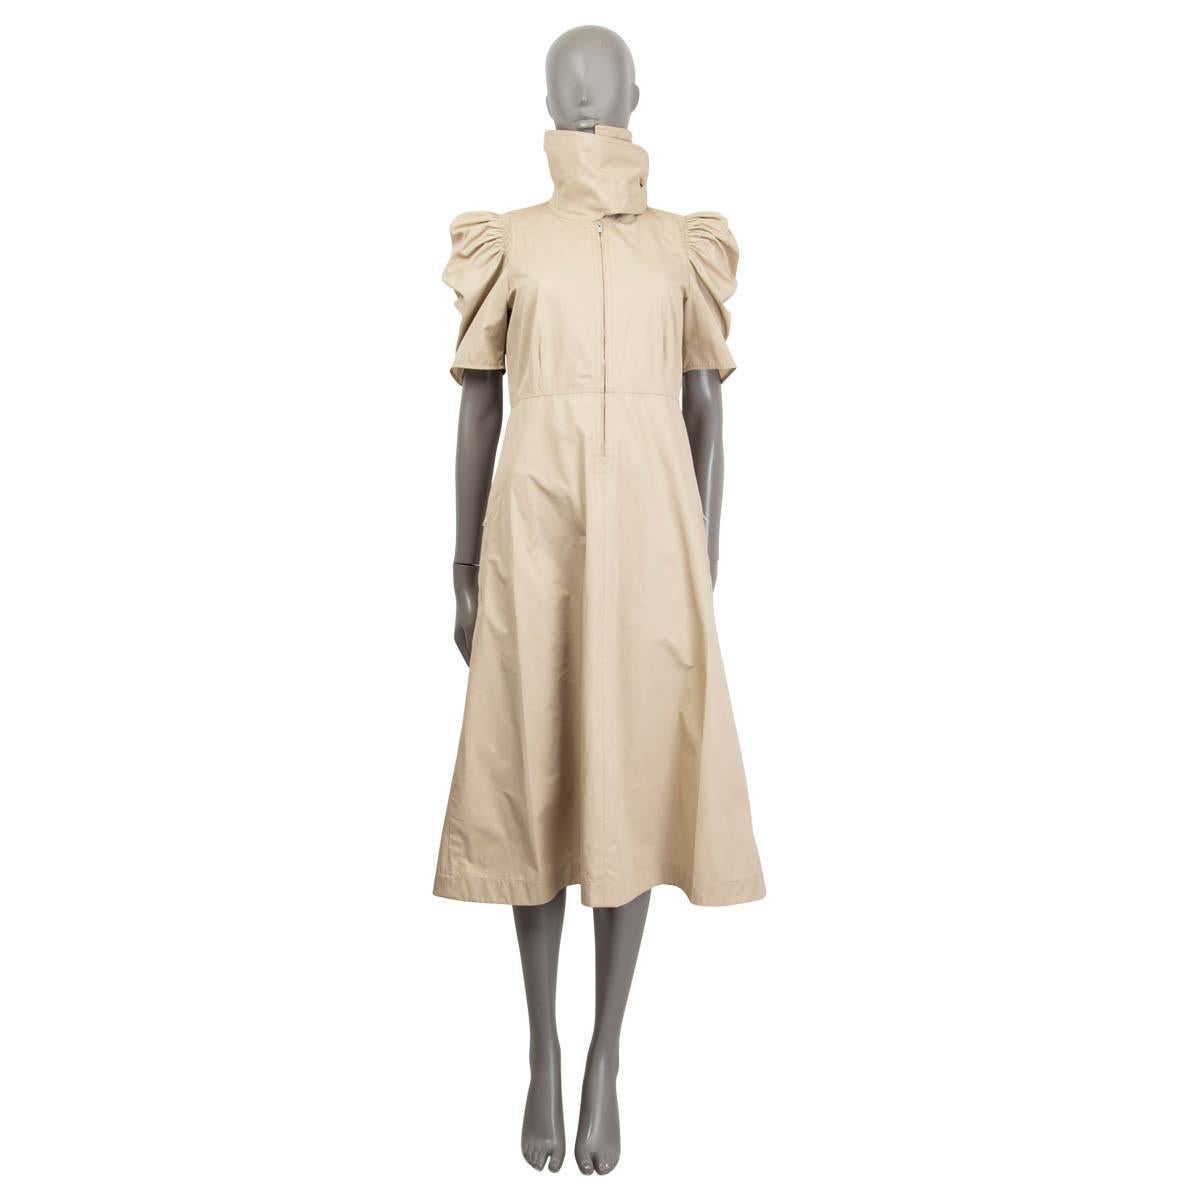 100% authentic Céline poplin dress in sand cotton (100%). Features short puff sleeves, a high neck and two zip pockets at the side. Opens with a zipper at the front and a button at the neck. Semi-lined in sand silk (100%). Brand new, with